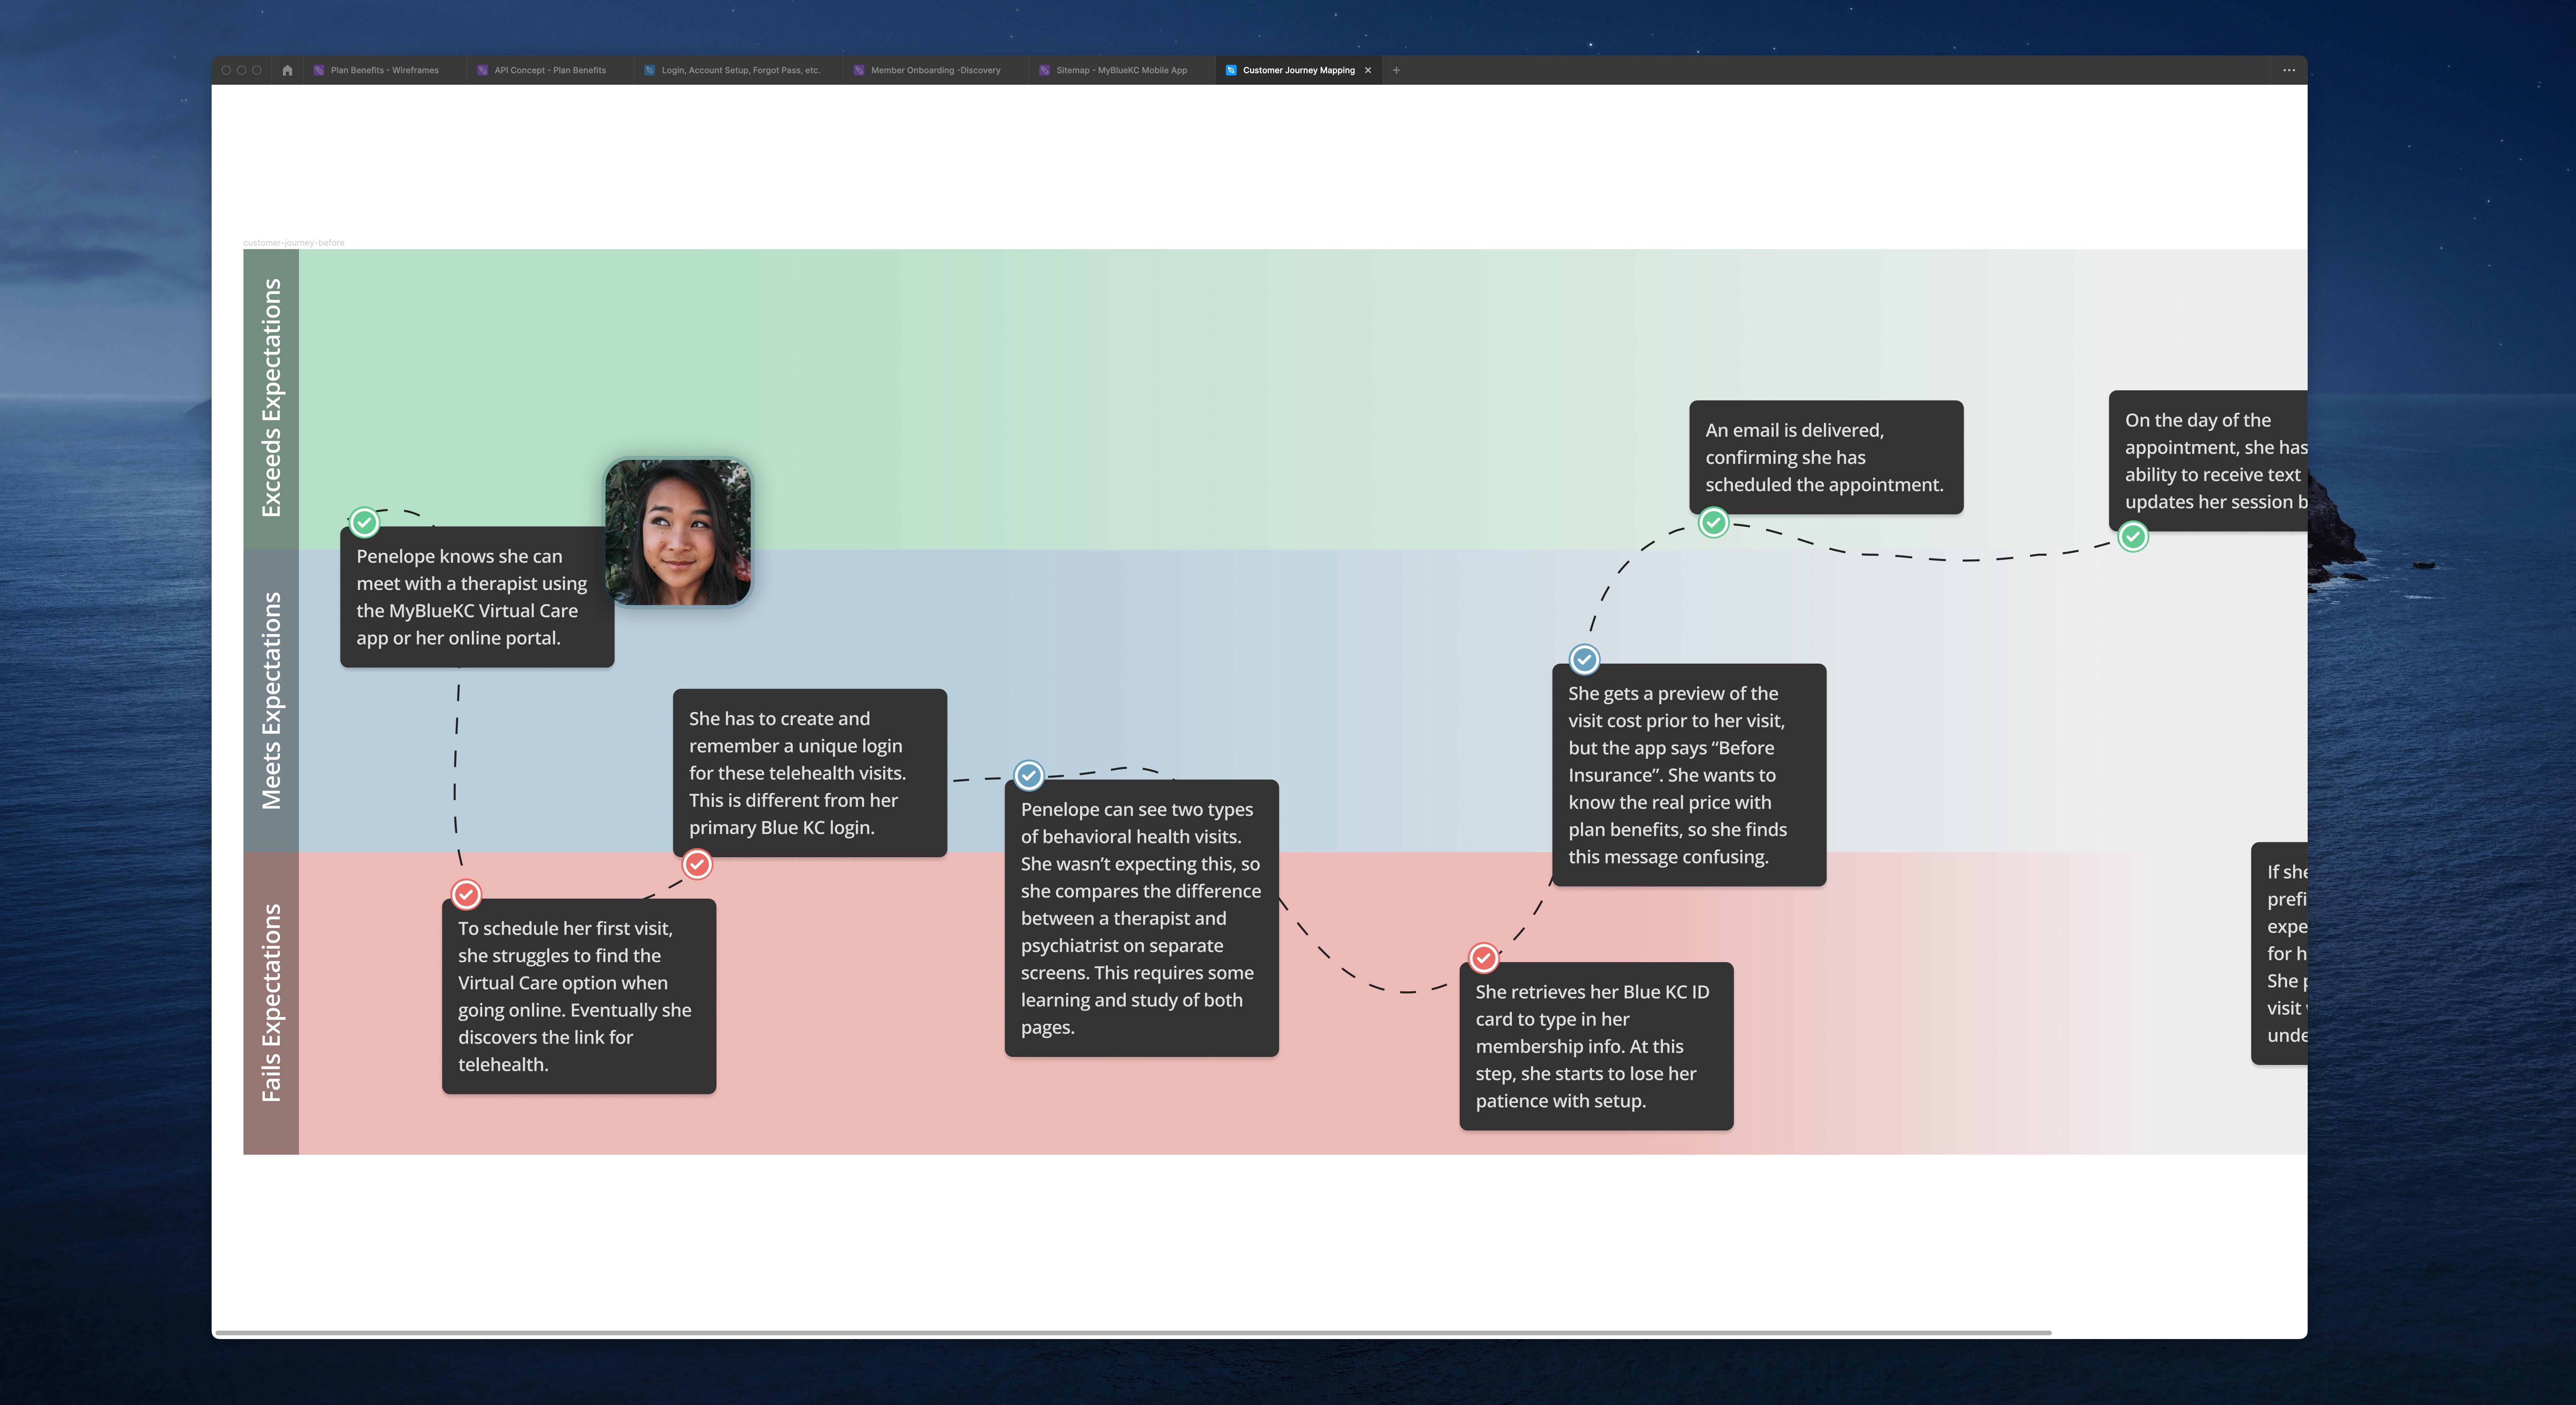 A customer journey map visualizing an end-to-end telehealth experience, including moments of delight and frustration along the way